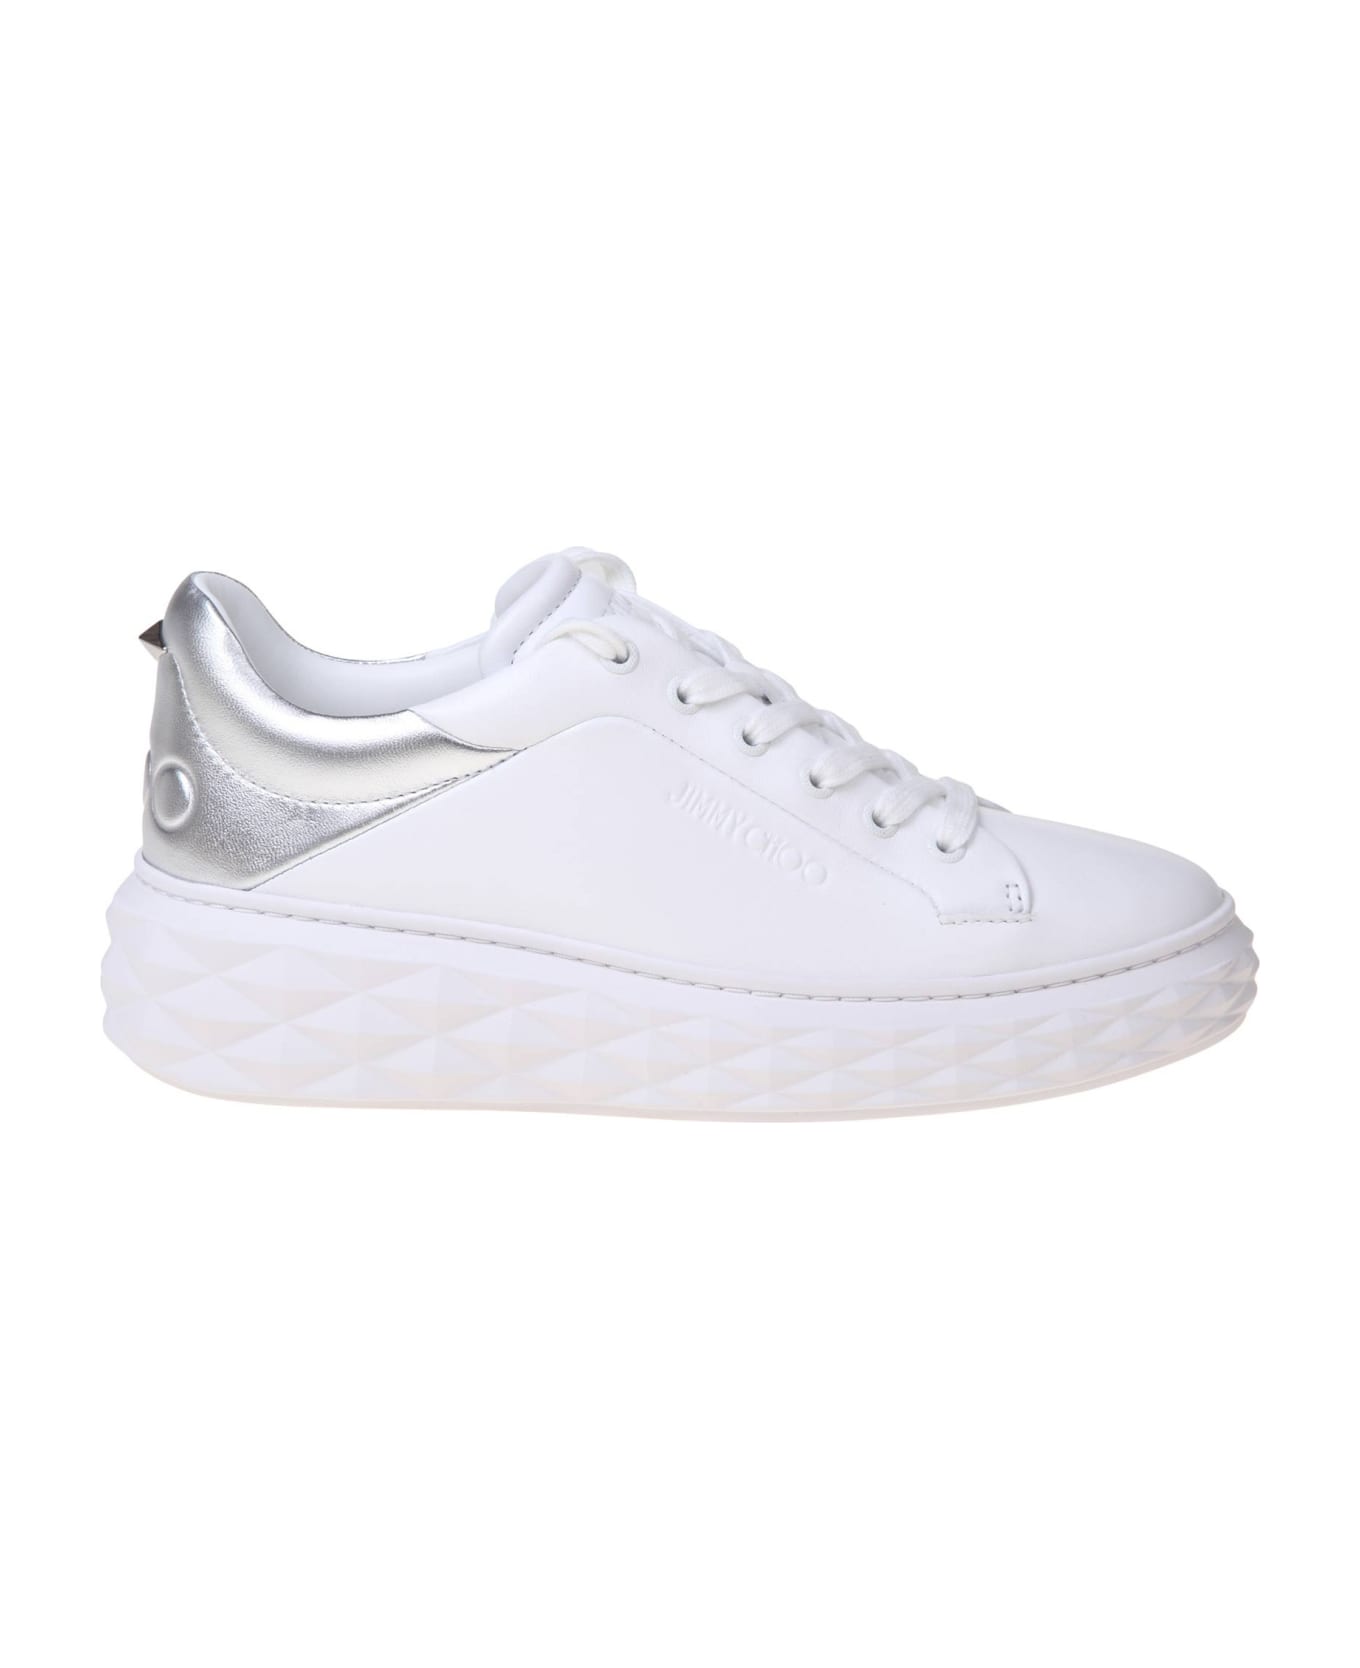 Jimmy Choo Diamond Maxi Sneakers In White And Silver Leather - White/Silver